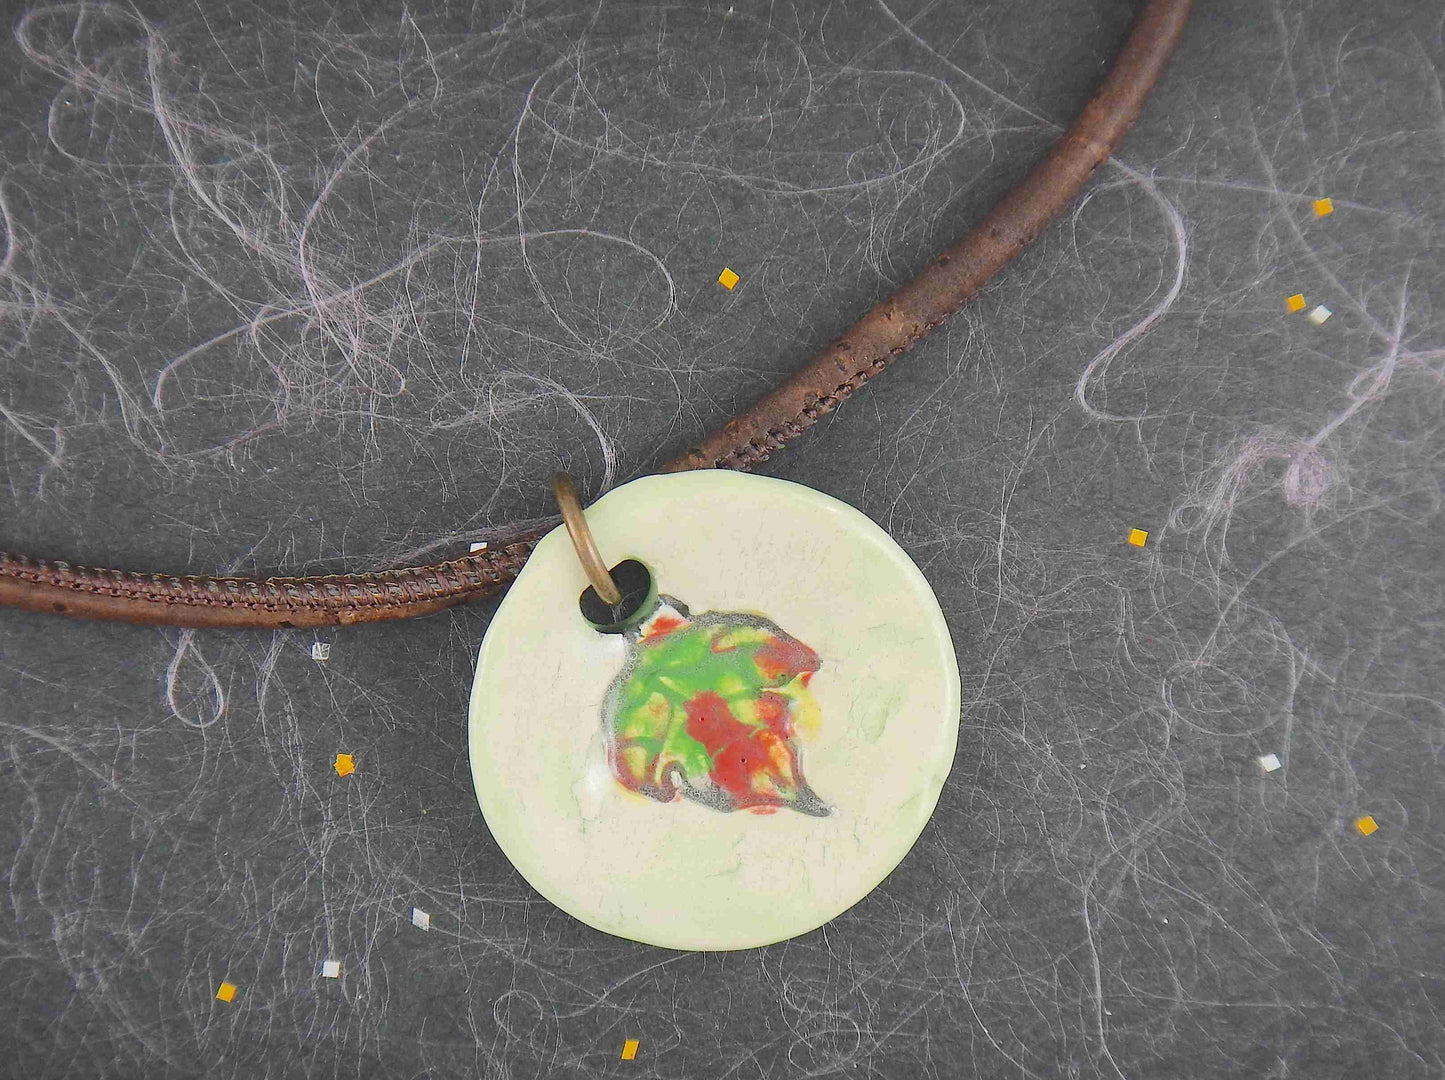 18-inch necklace with off-white ceramic medallion pendant handmade in Montreal, red-green-yellow leaf pattern, chocolate brown cork cord, aluminum ring, stainless steel clasp